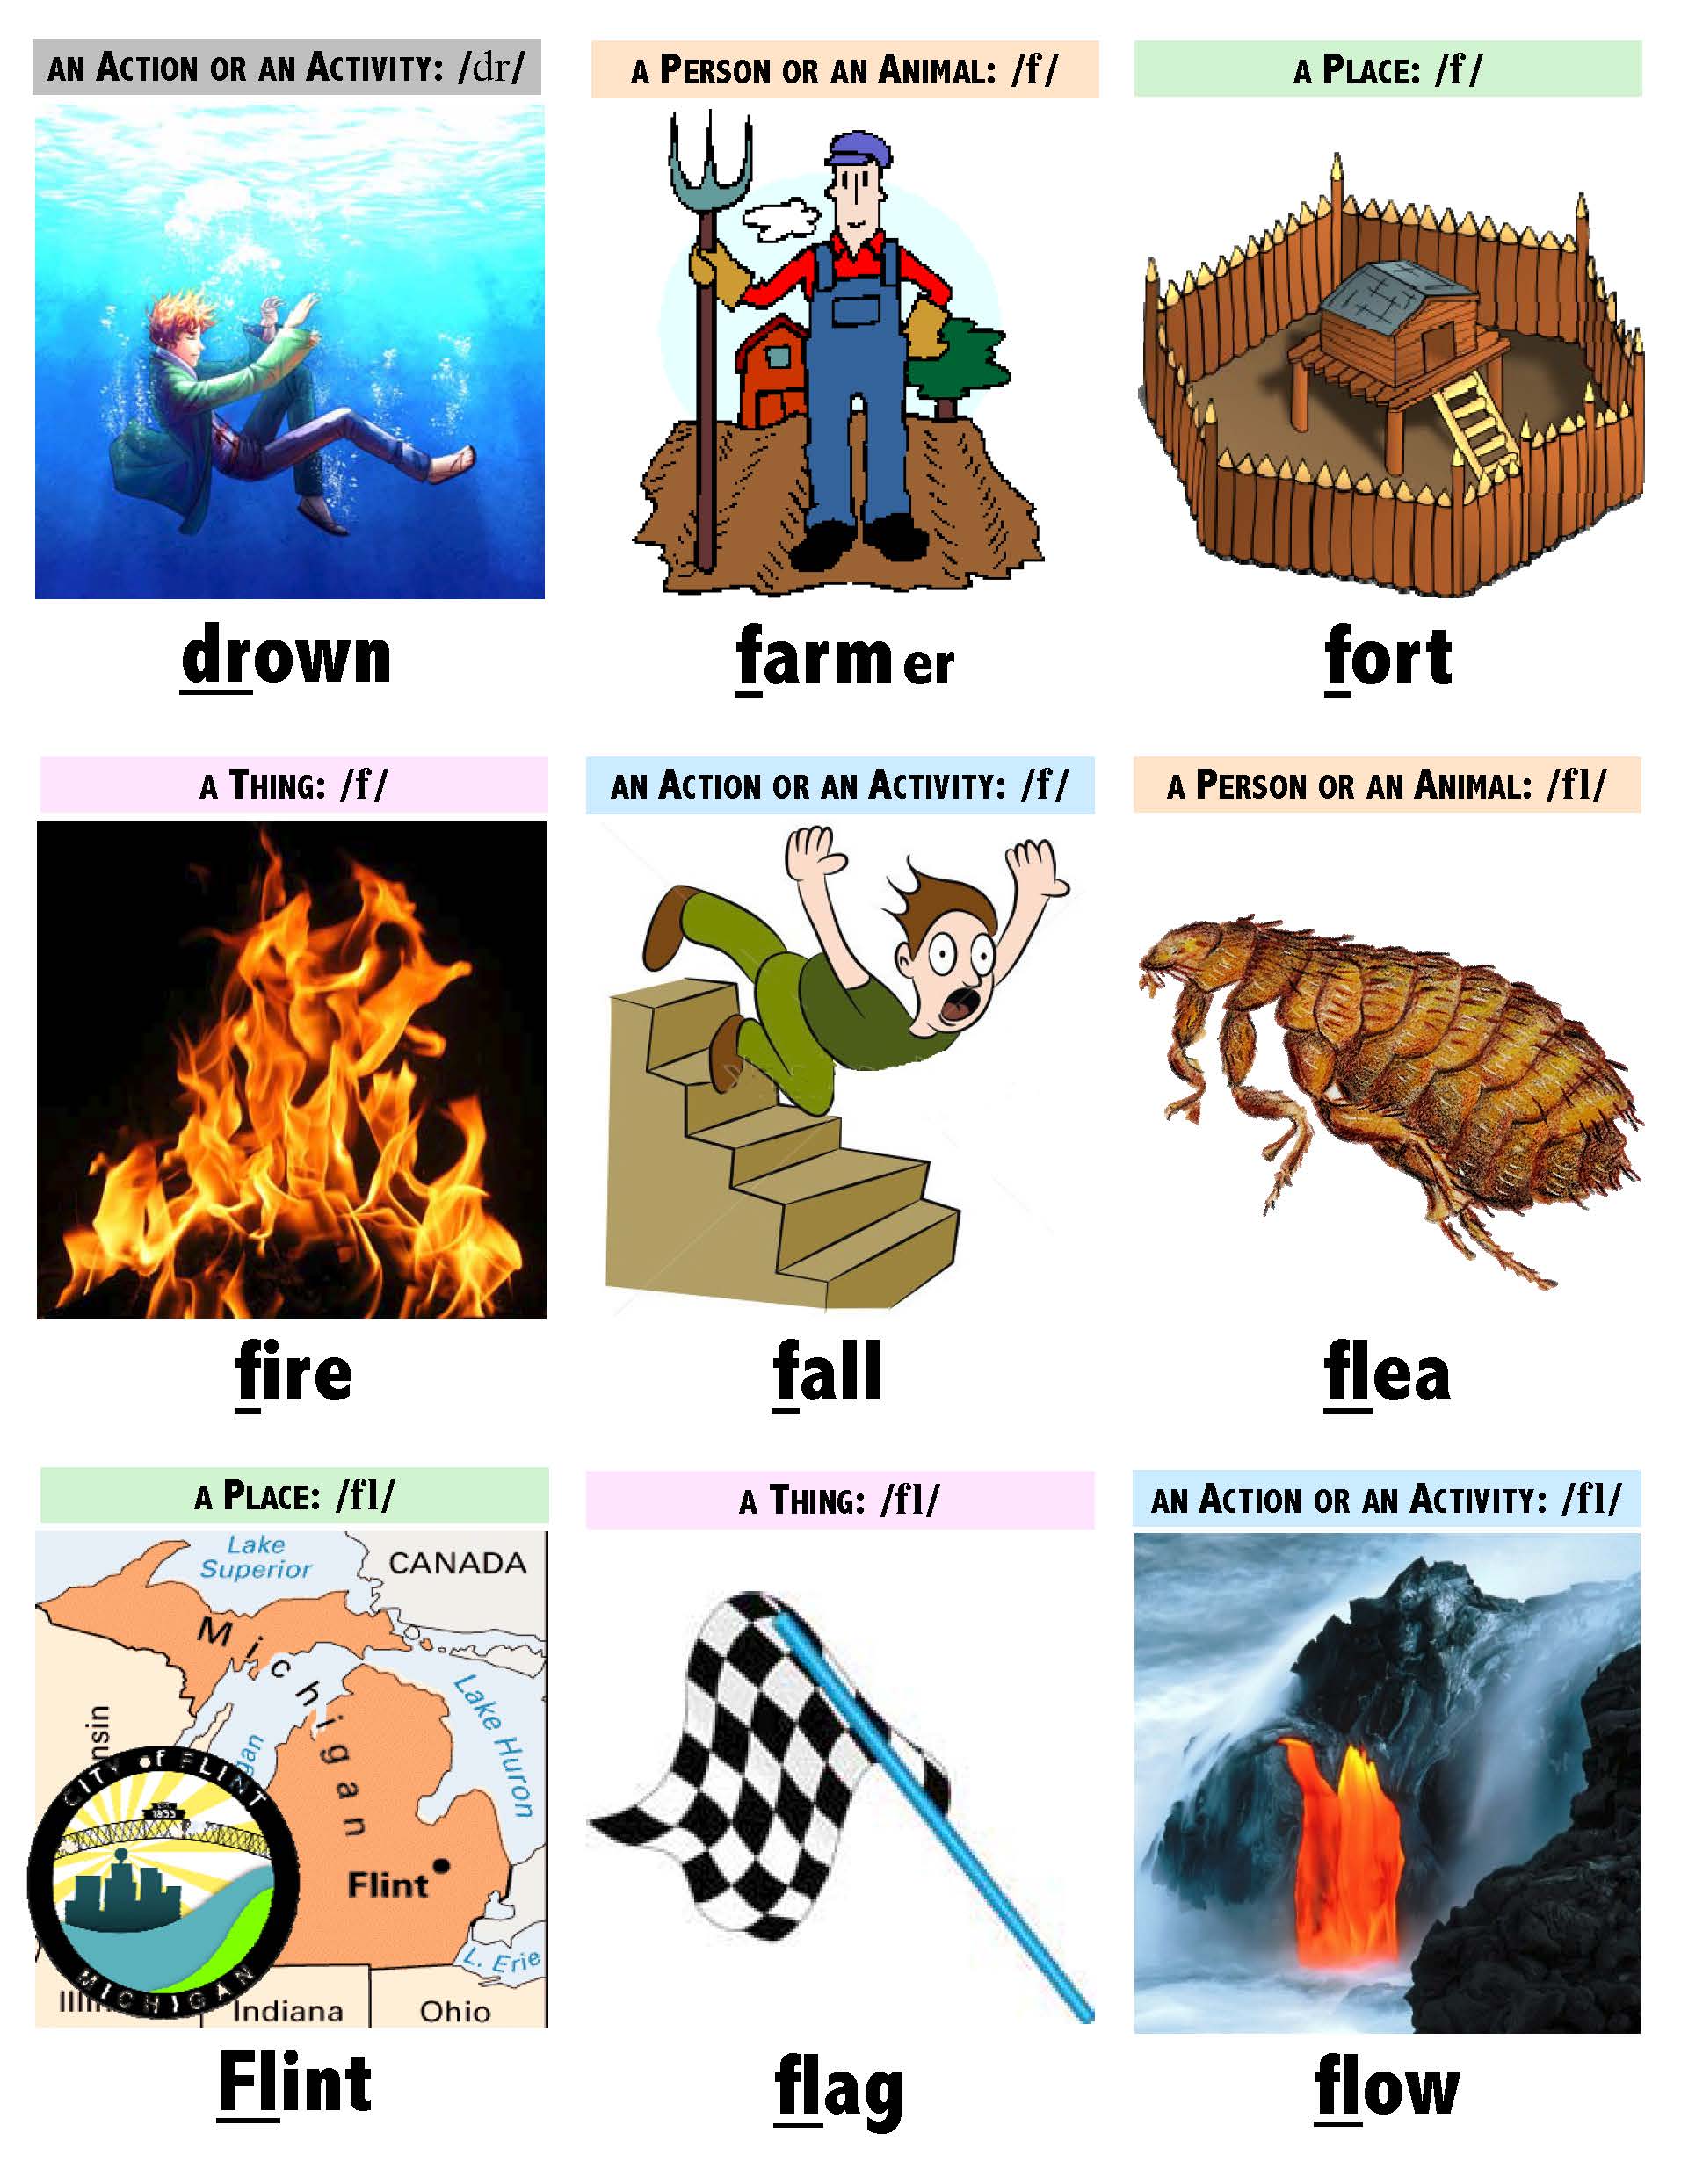 Get & Use 72 Beginning Initial Consonants Picture & Words Cards – Work/Life  English